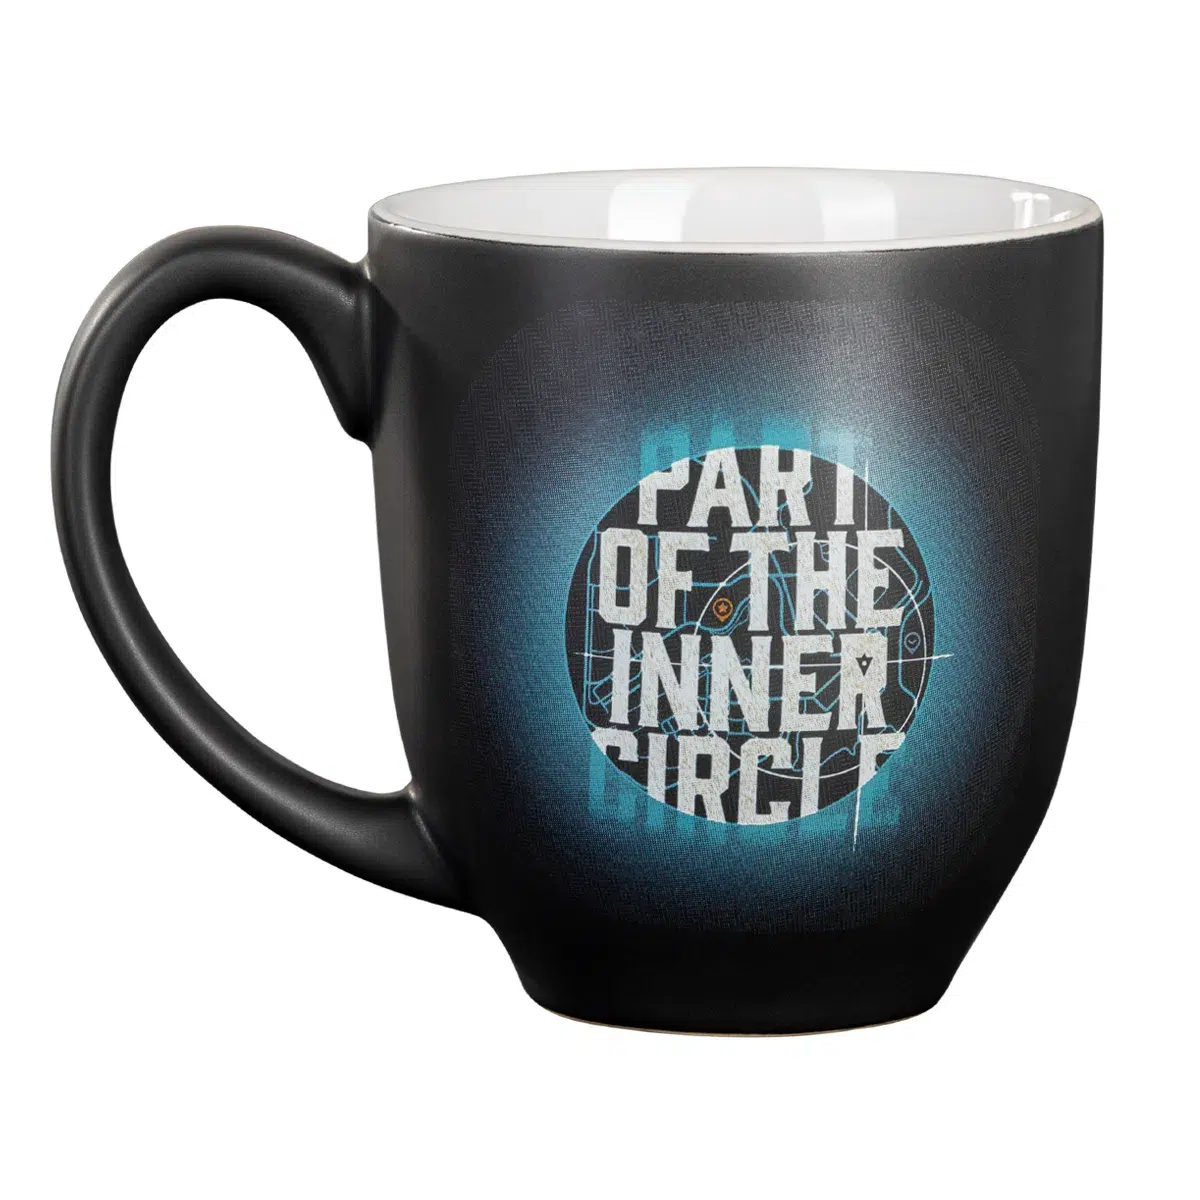 Call of Duty Warzone Two-Colored Mug "Inner Circle"